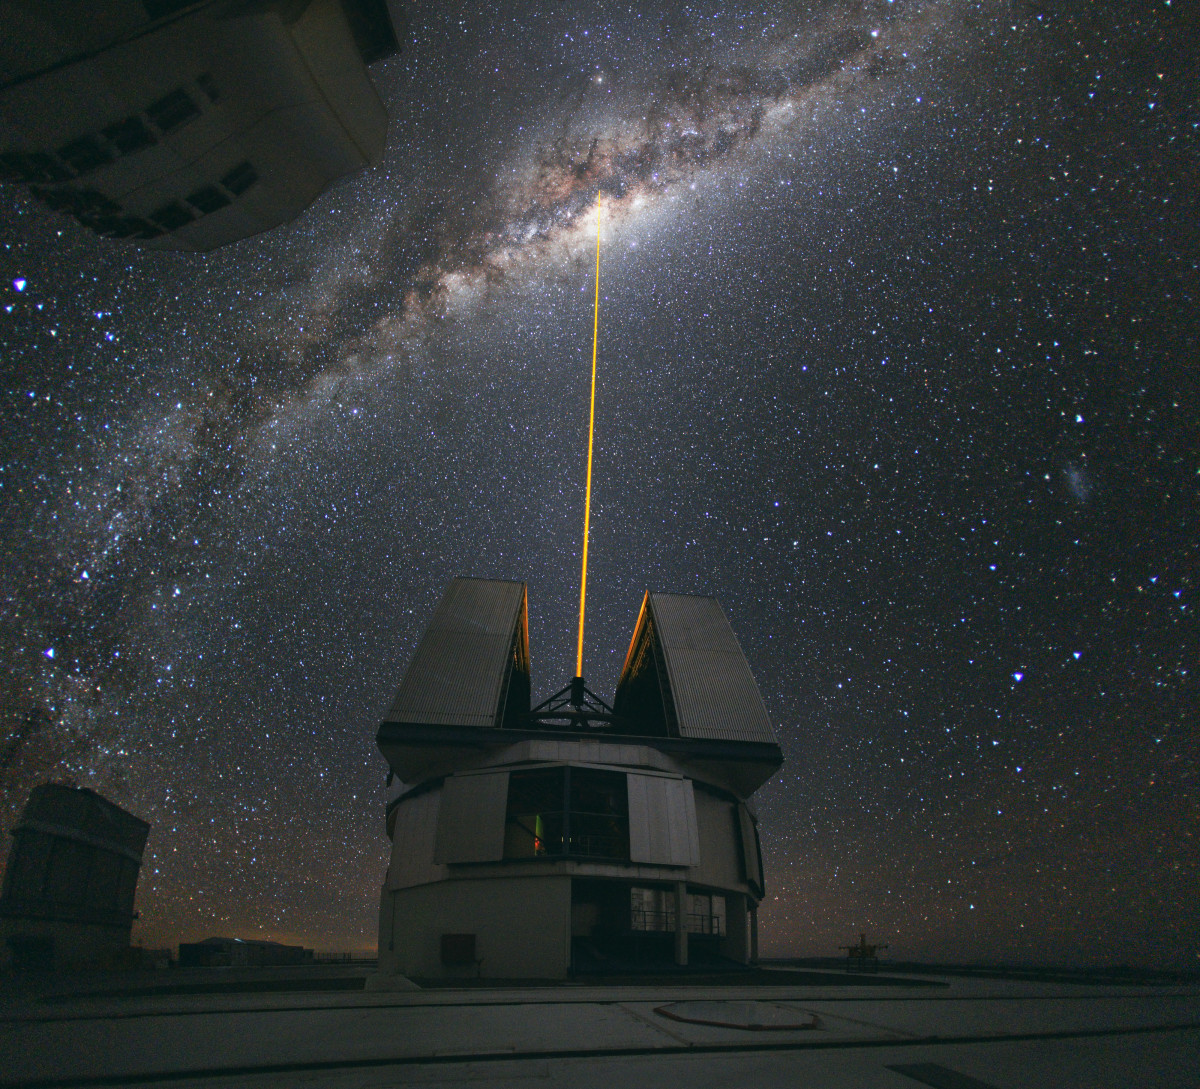 The European Southern Observatory in Chile pointing a laser towards the center of the Milkyway